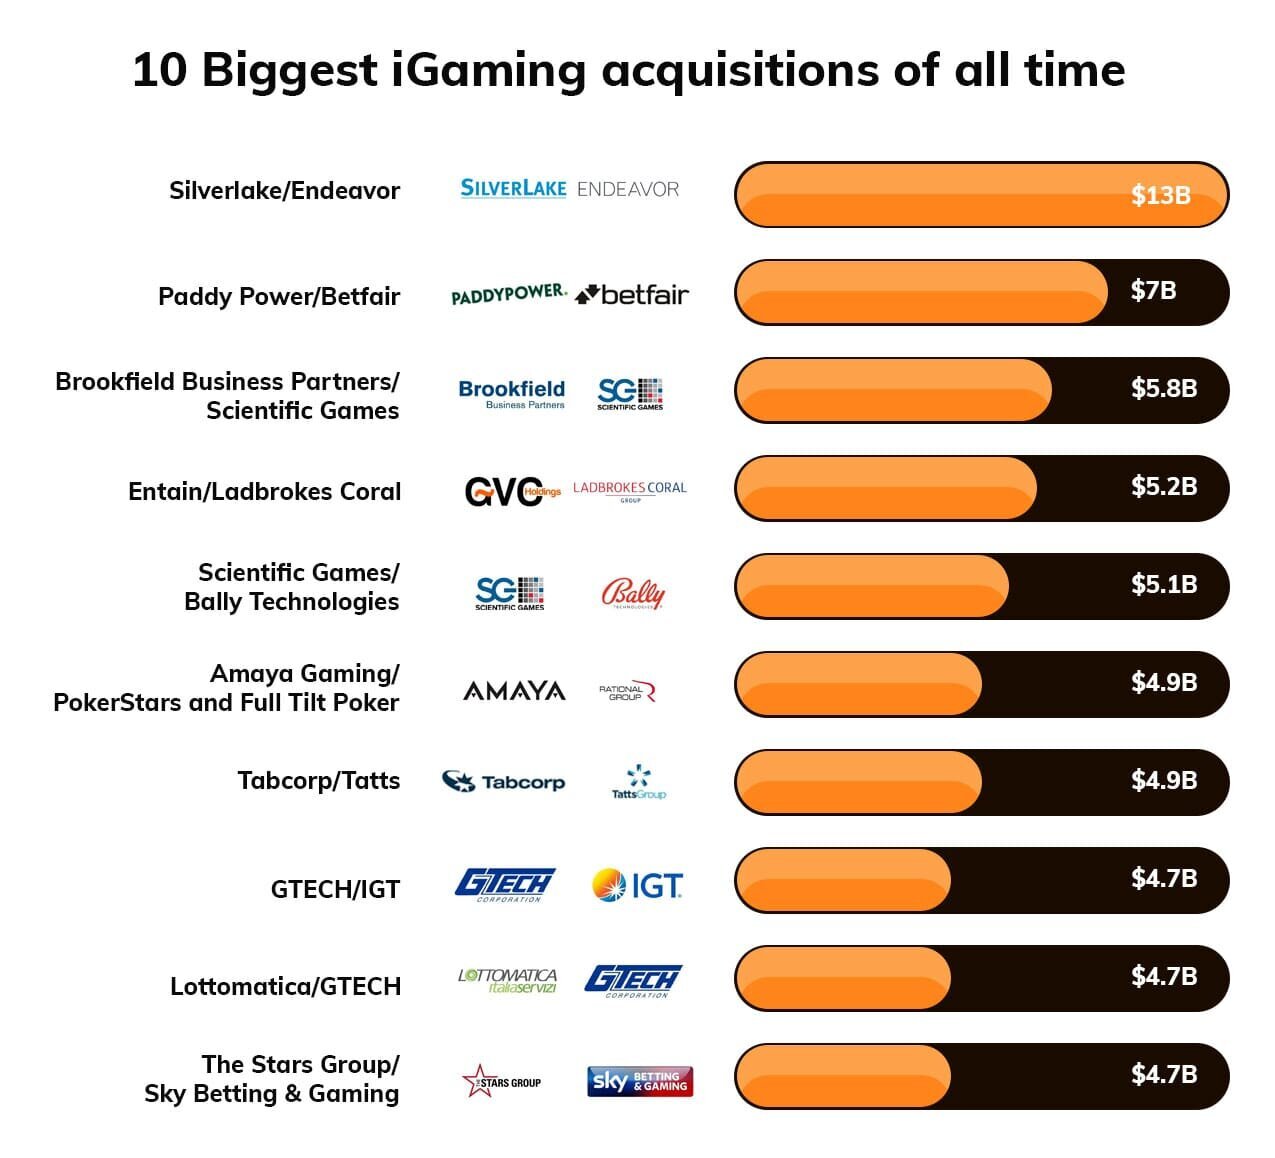 The biggest casino acquisitions of all time